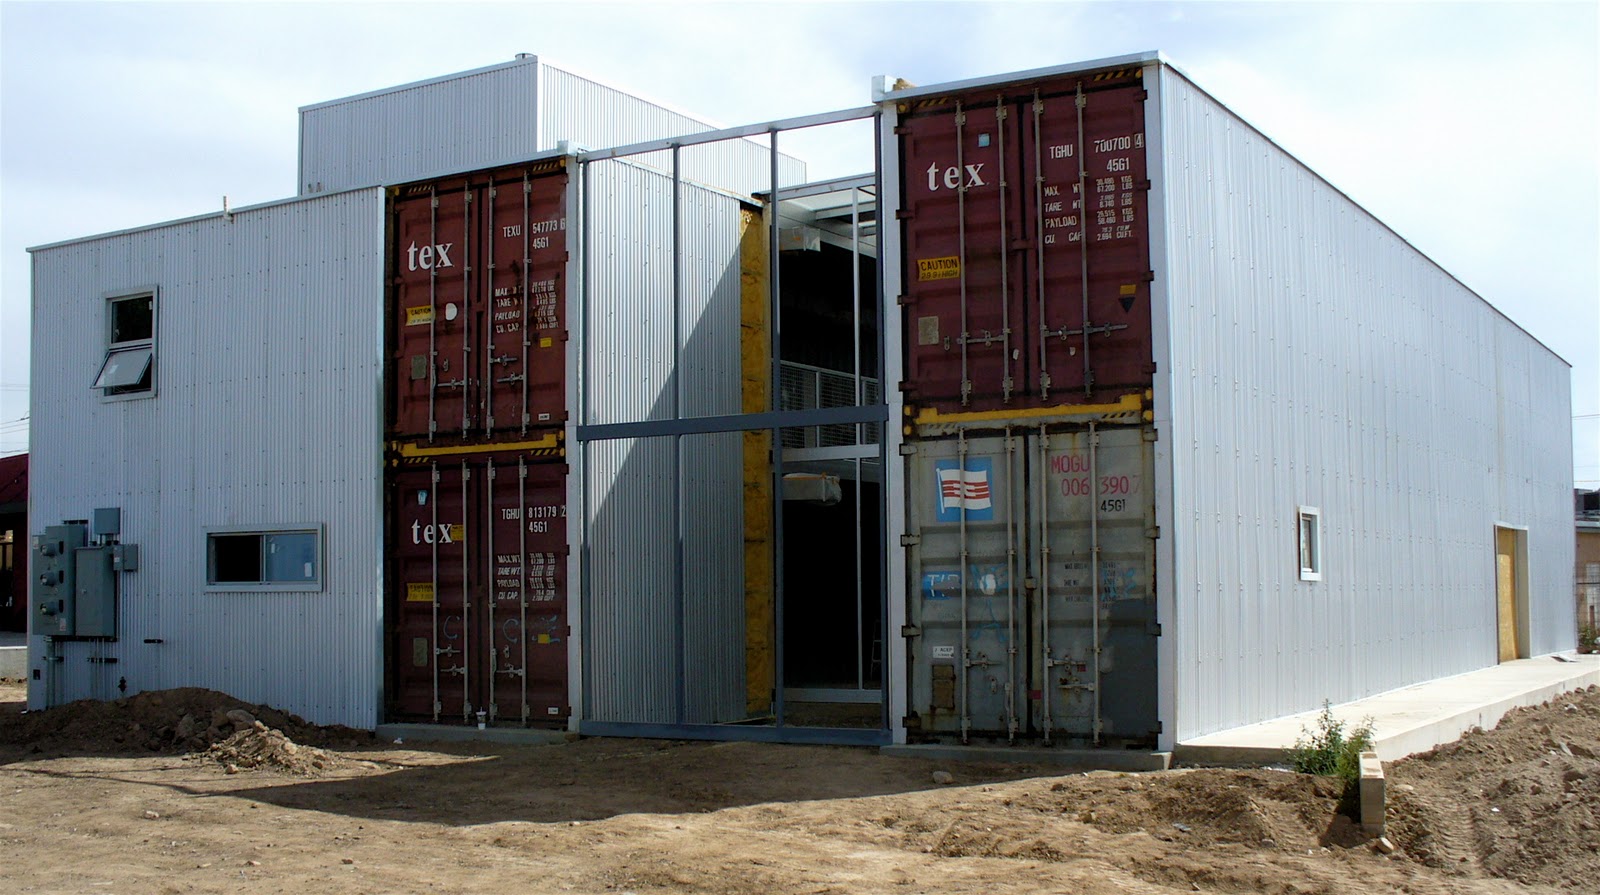 Alt. Build Blog: More On Shipping Container Building